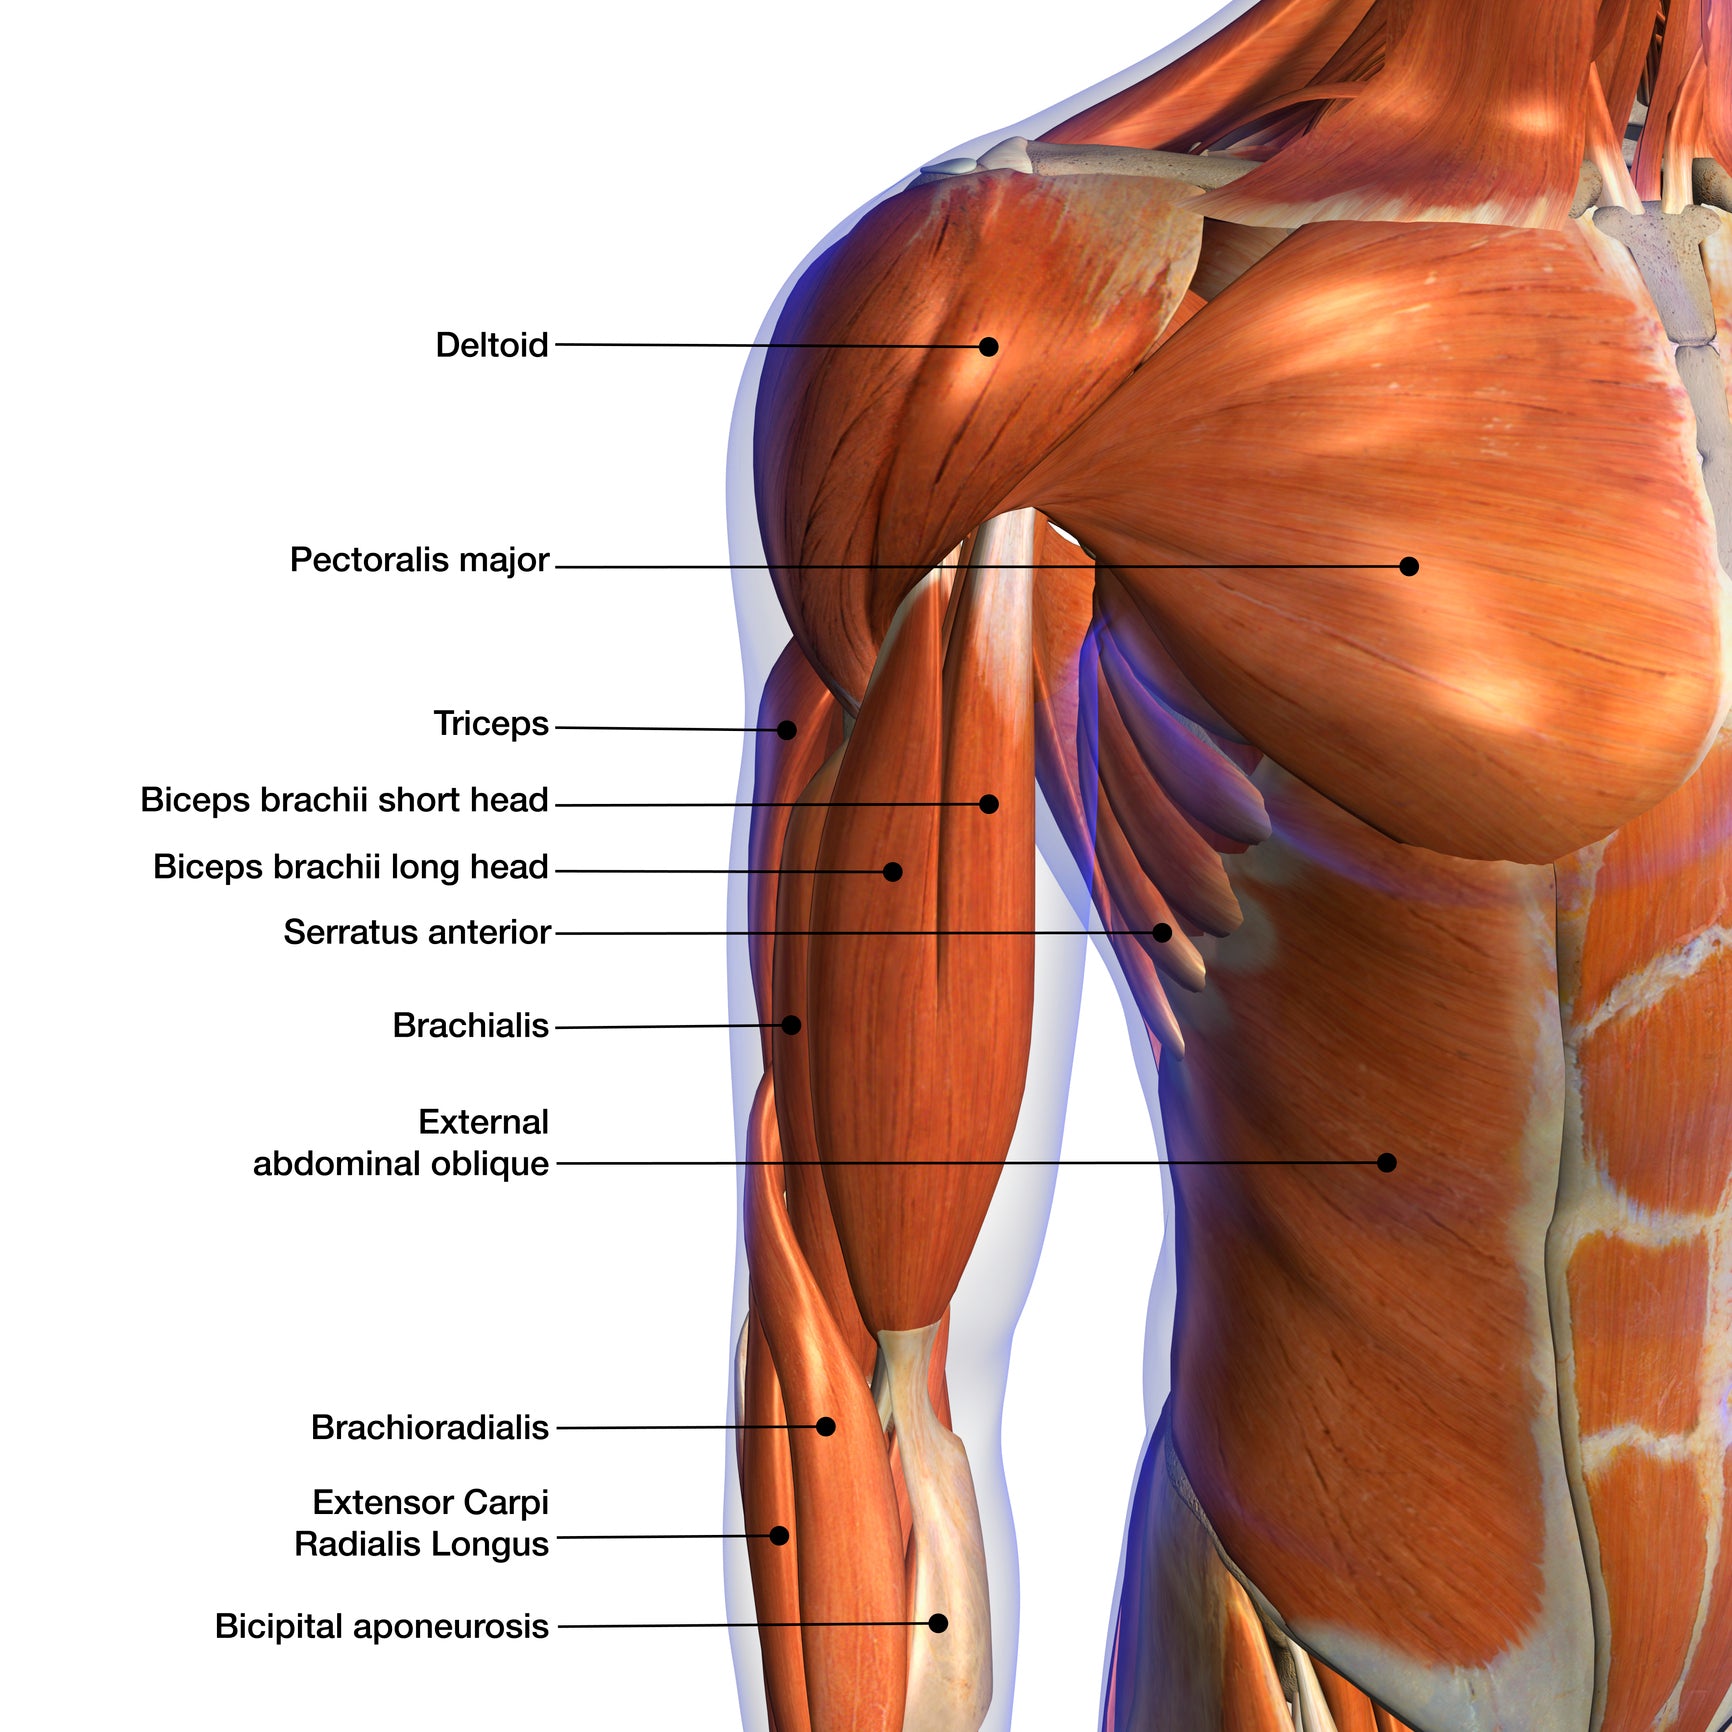 tricep muscles